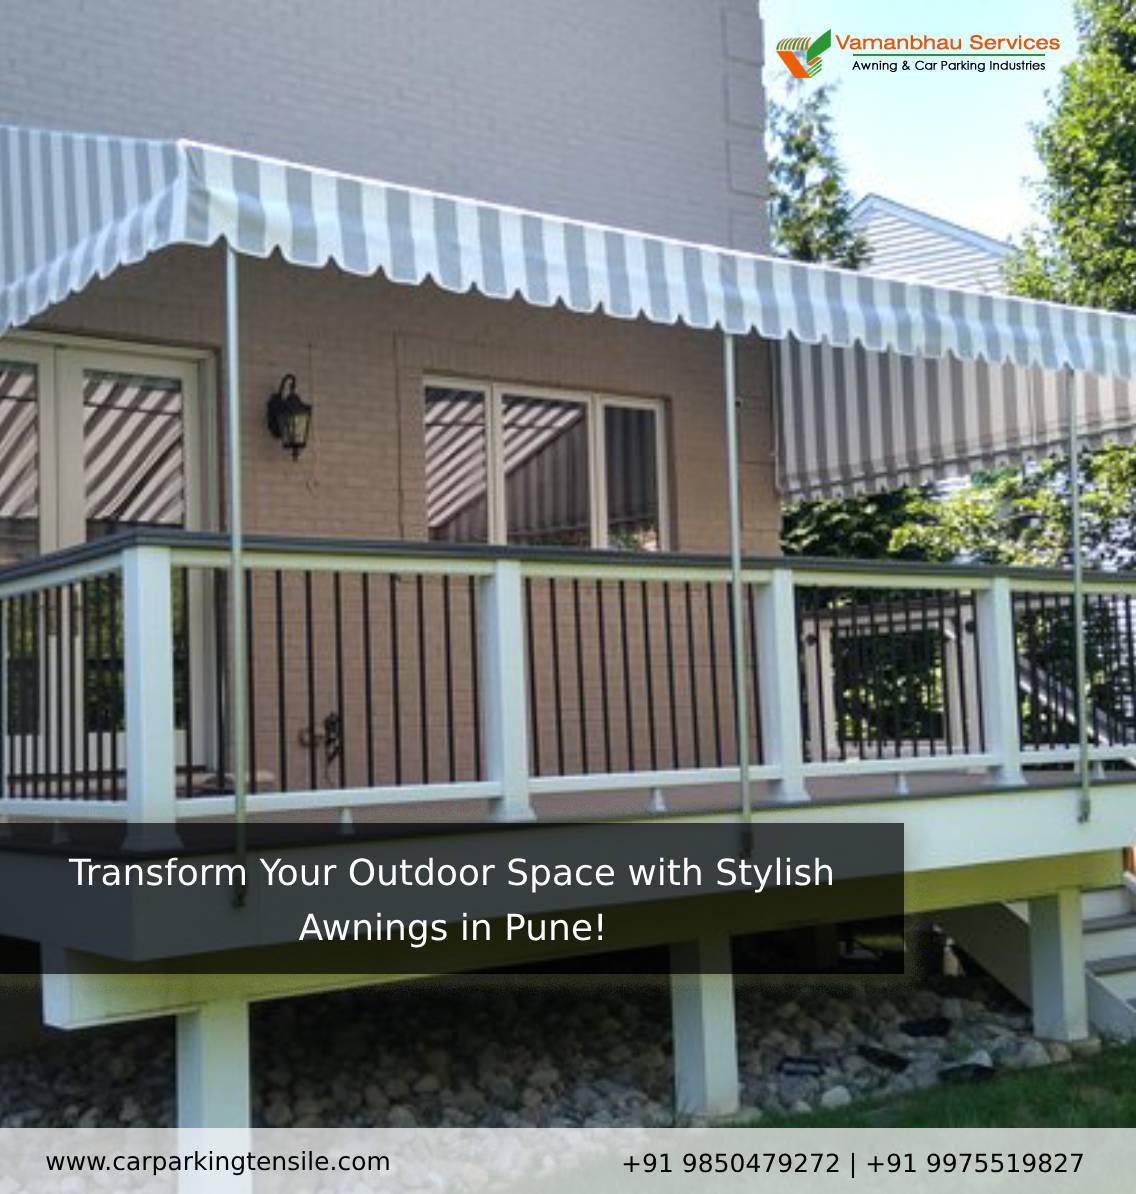 Transform Your Outdoor Space with Stylish Awnings in Pune!